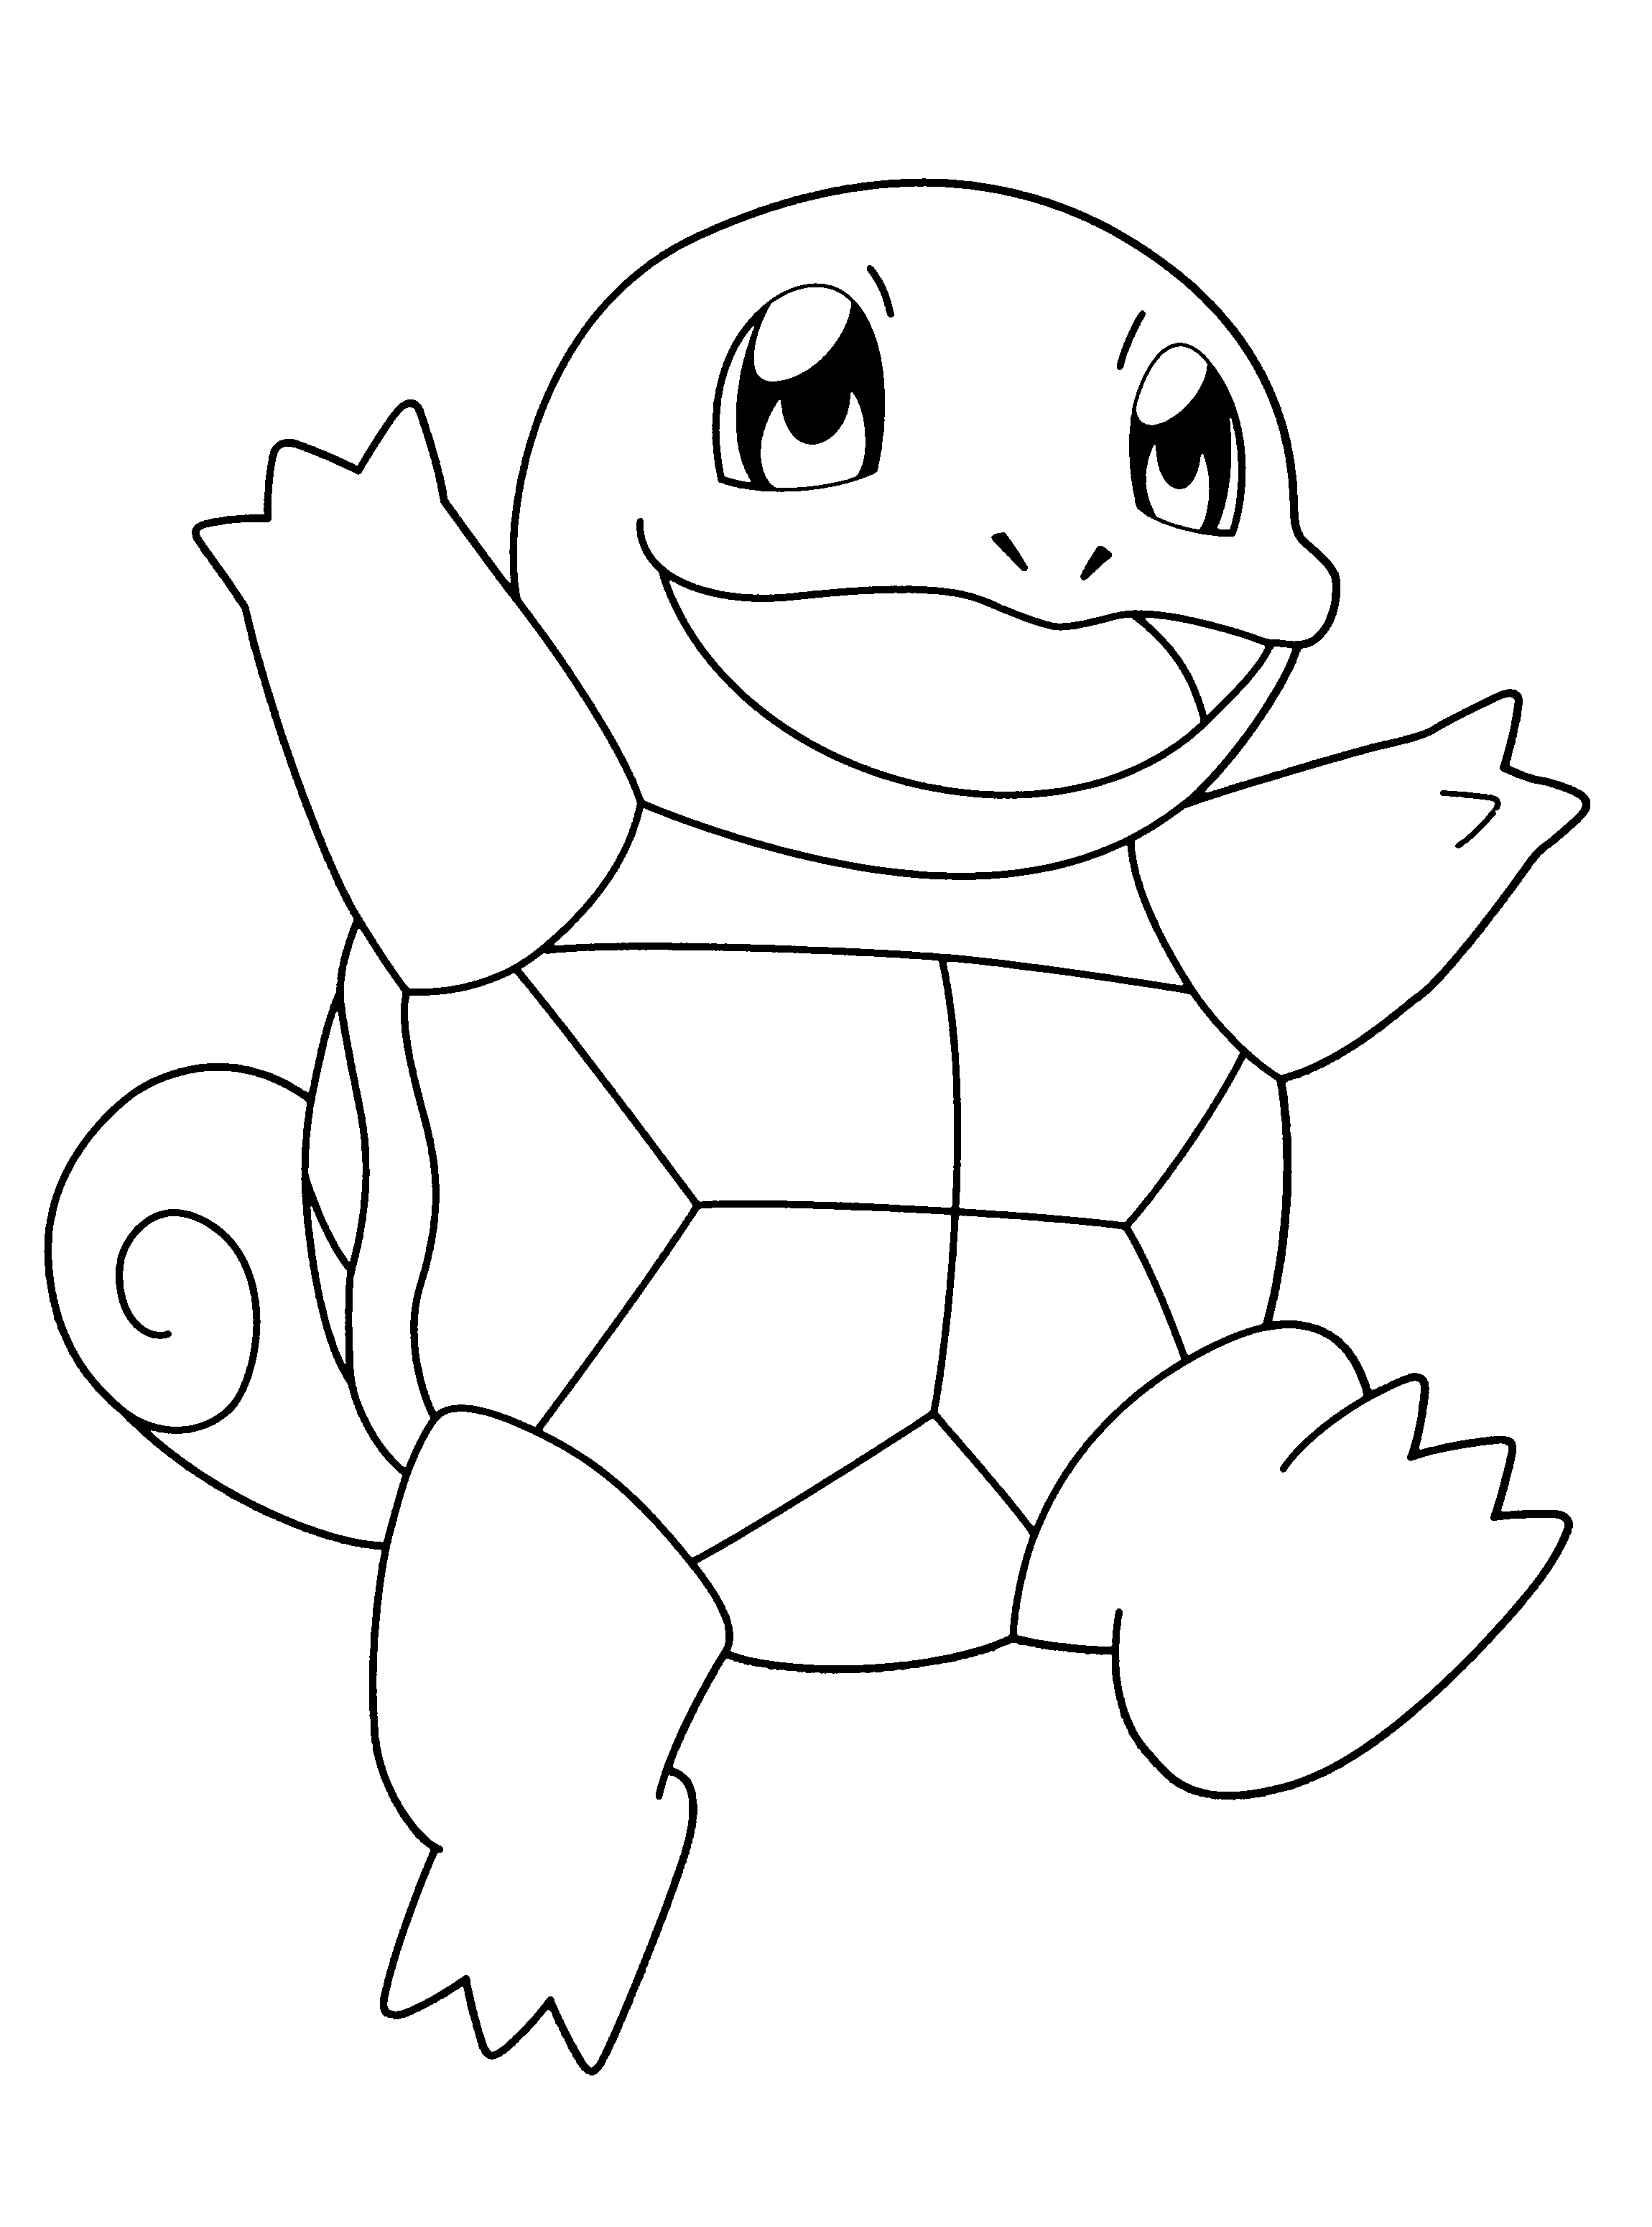 Pokemon to color for kids - All Pokemon coloring pages Kids Coloring Pages